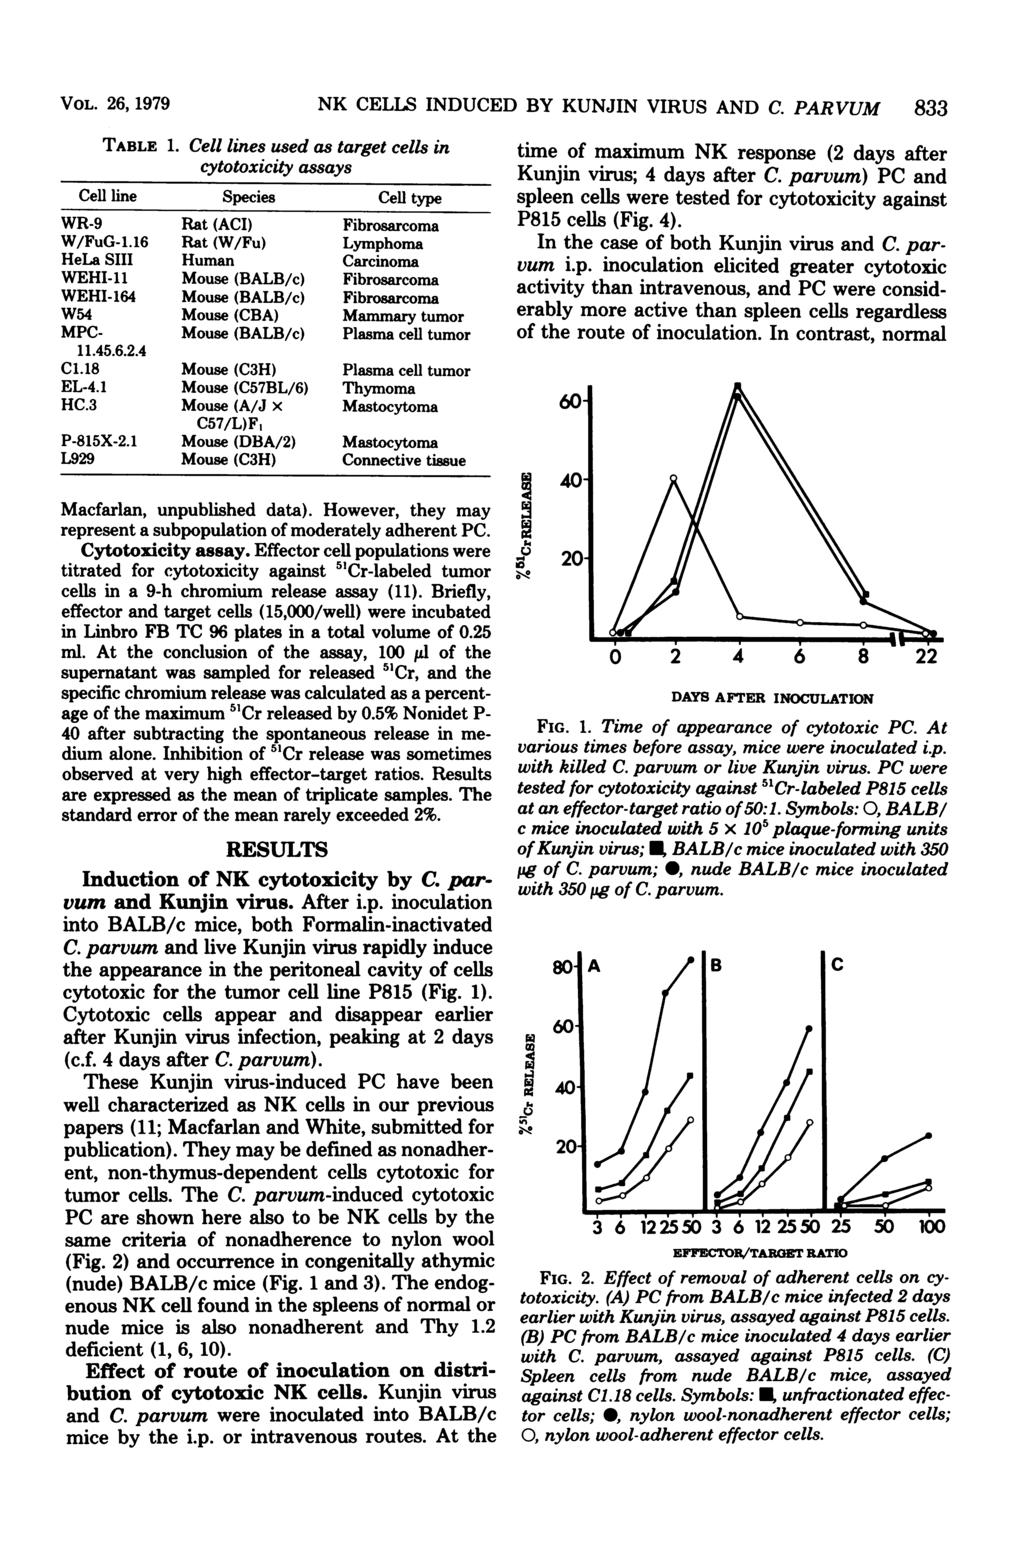 VOL. 26, 1979 TABLE 1. NK CELLS INDUCED BY KUNJIN VIRUS AND C. PARVUM 833 Cell lines used as target cells in cytotoxicity assays Cell line Species Cell type WR-9 Rat (ACI) Fibrosarcoma W/FuG-1.